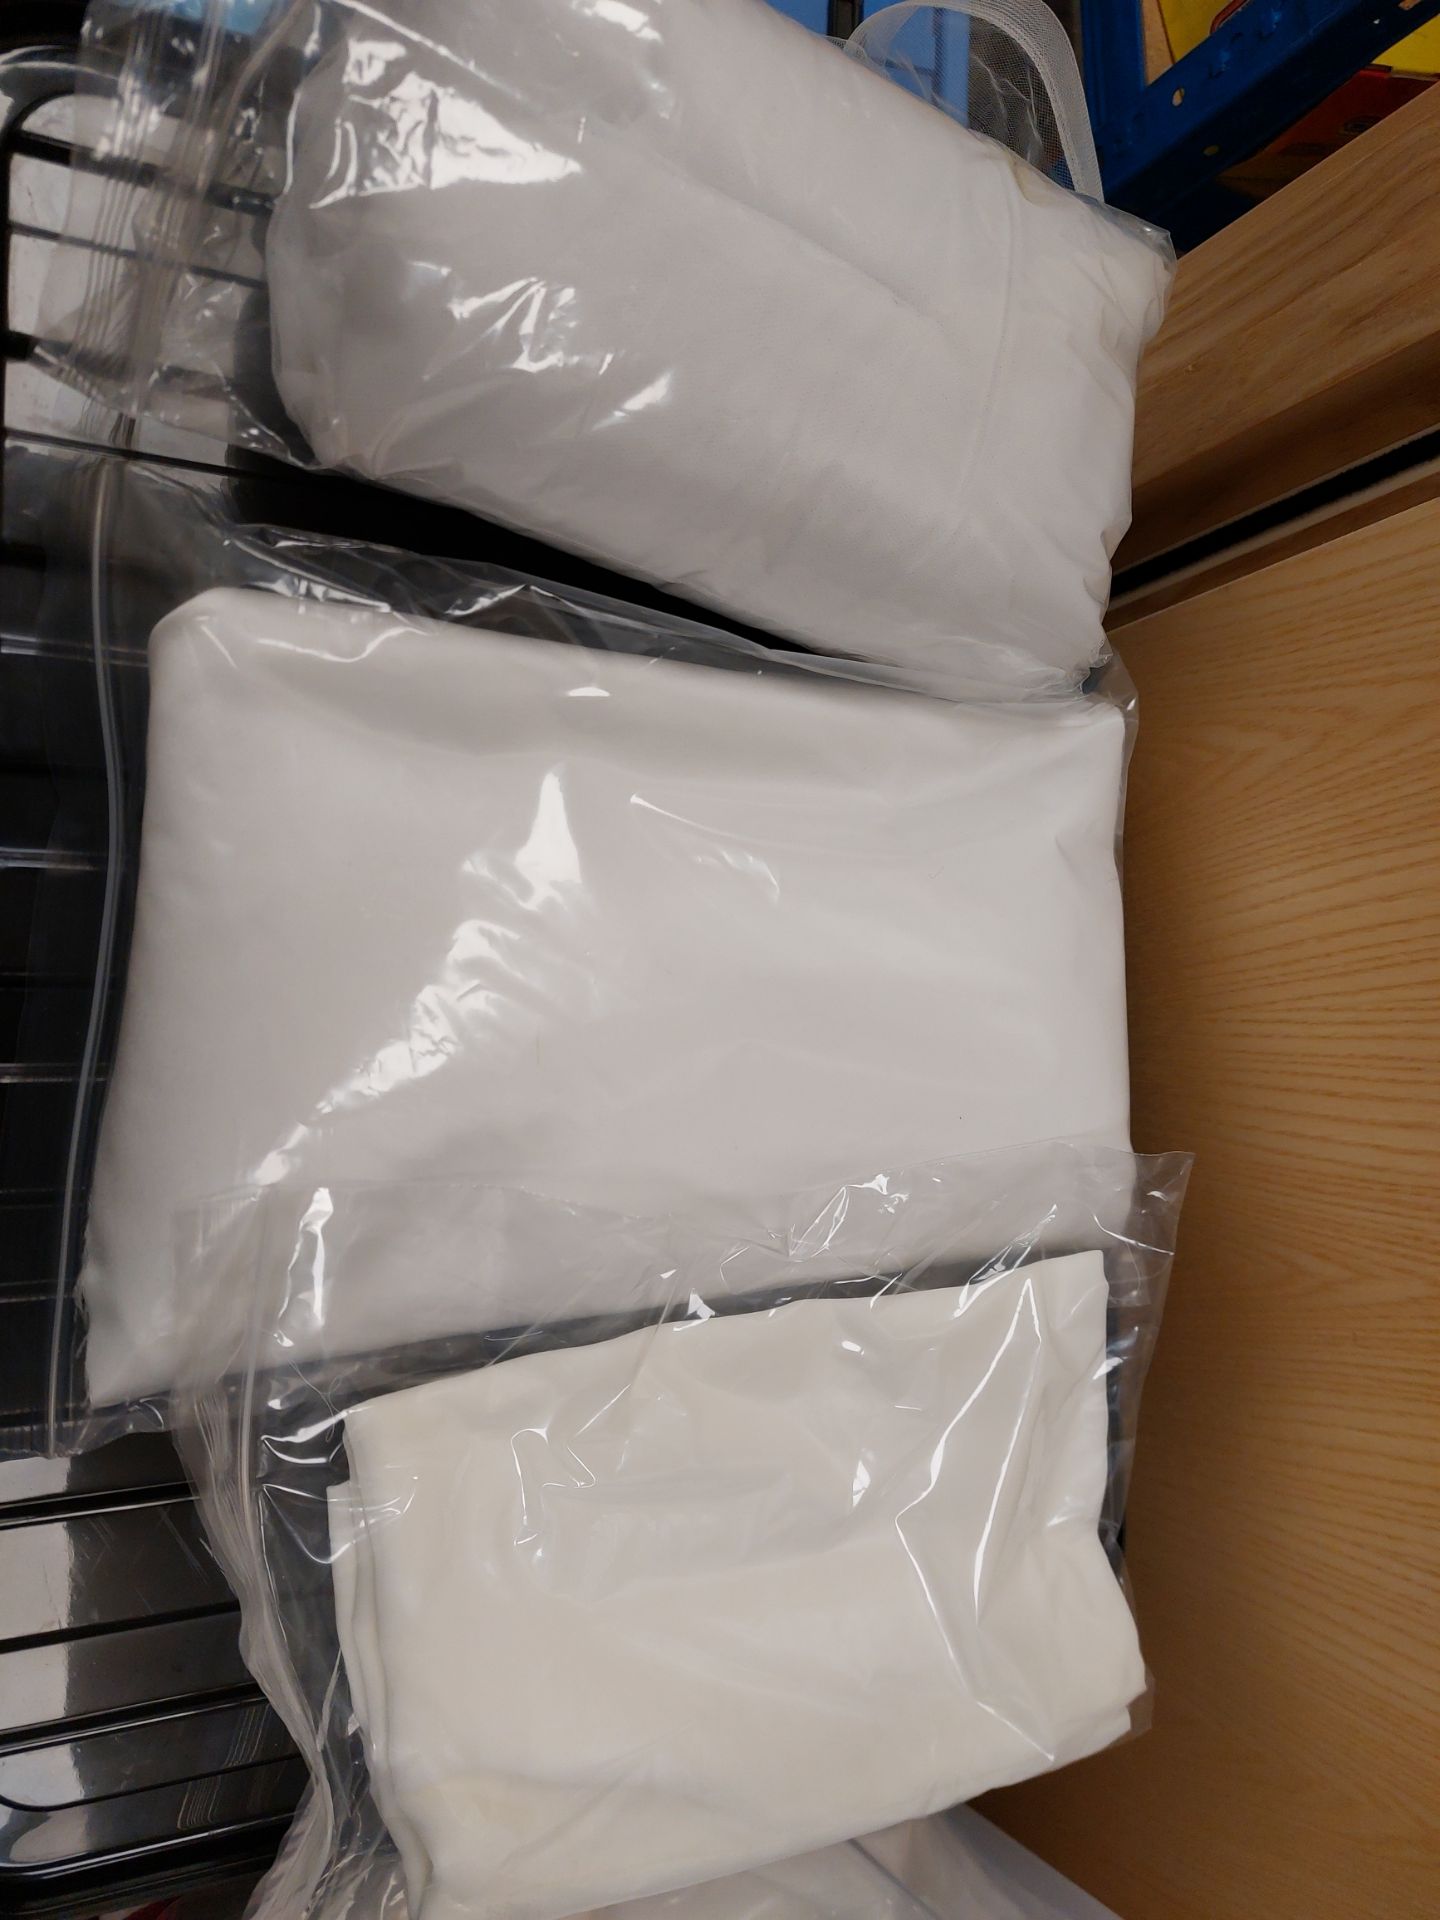 Quantity of Ivory Or White Fabric Bundles - Image 4 of 8